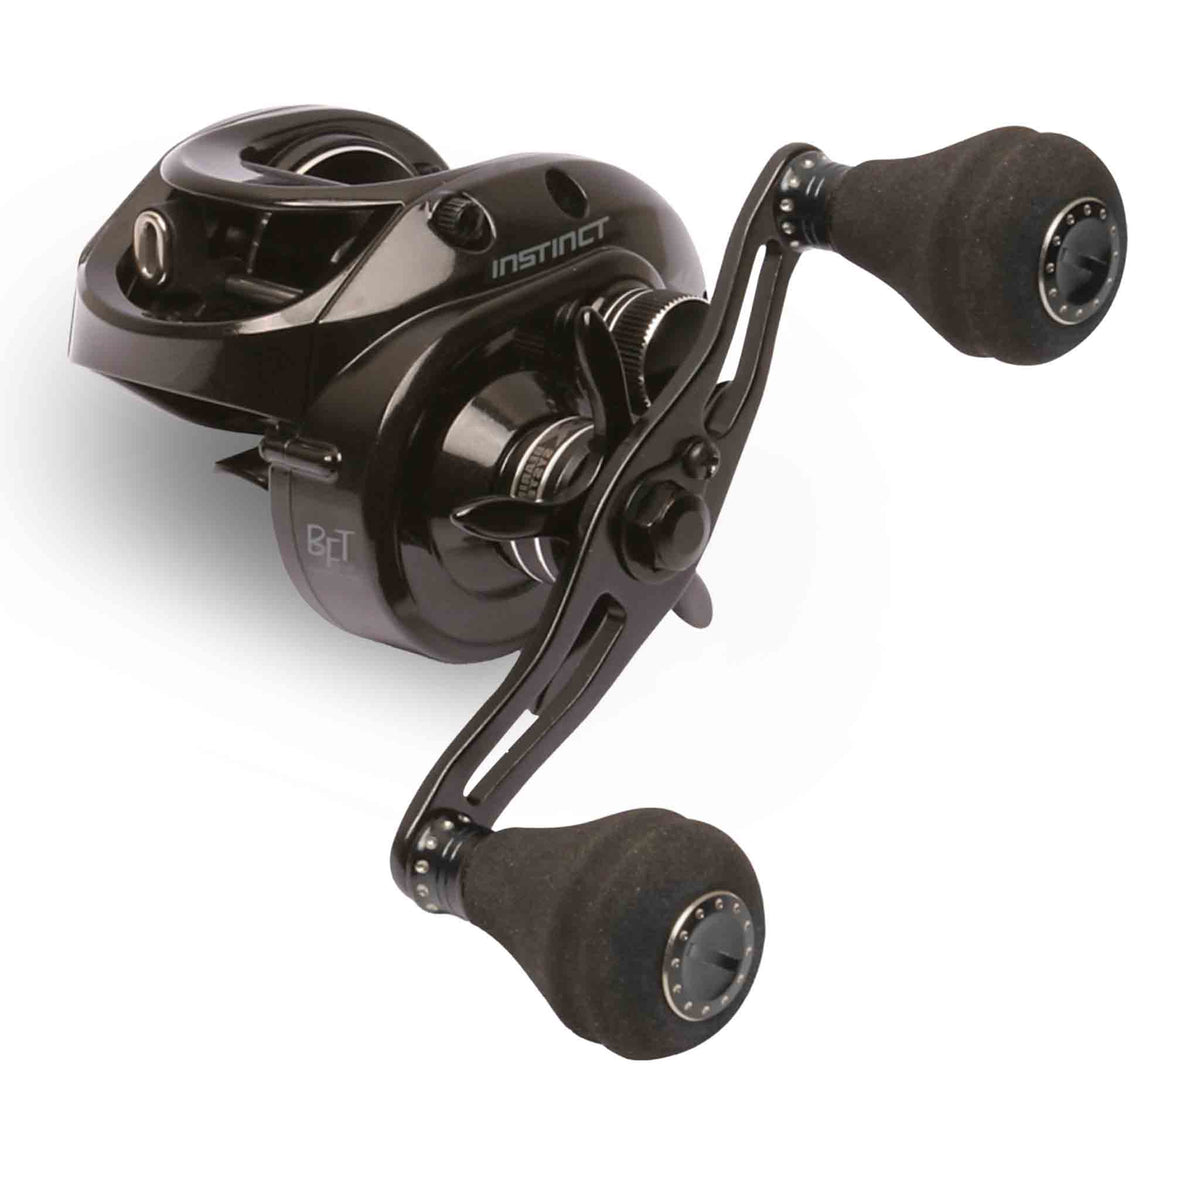 Round Baitcasting Reel, Light Weight Ultra Smooth Spinning Fishing Reel,  for Catfish, Musky, Bass, Pike - Left and Right Interchangeable Handles  (Size